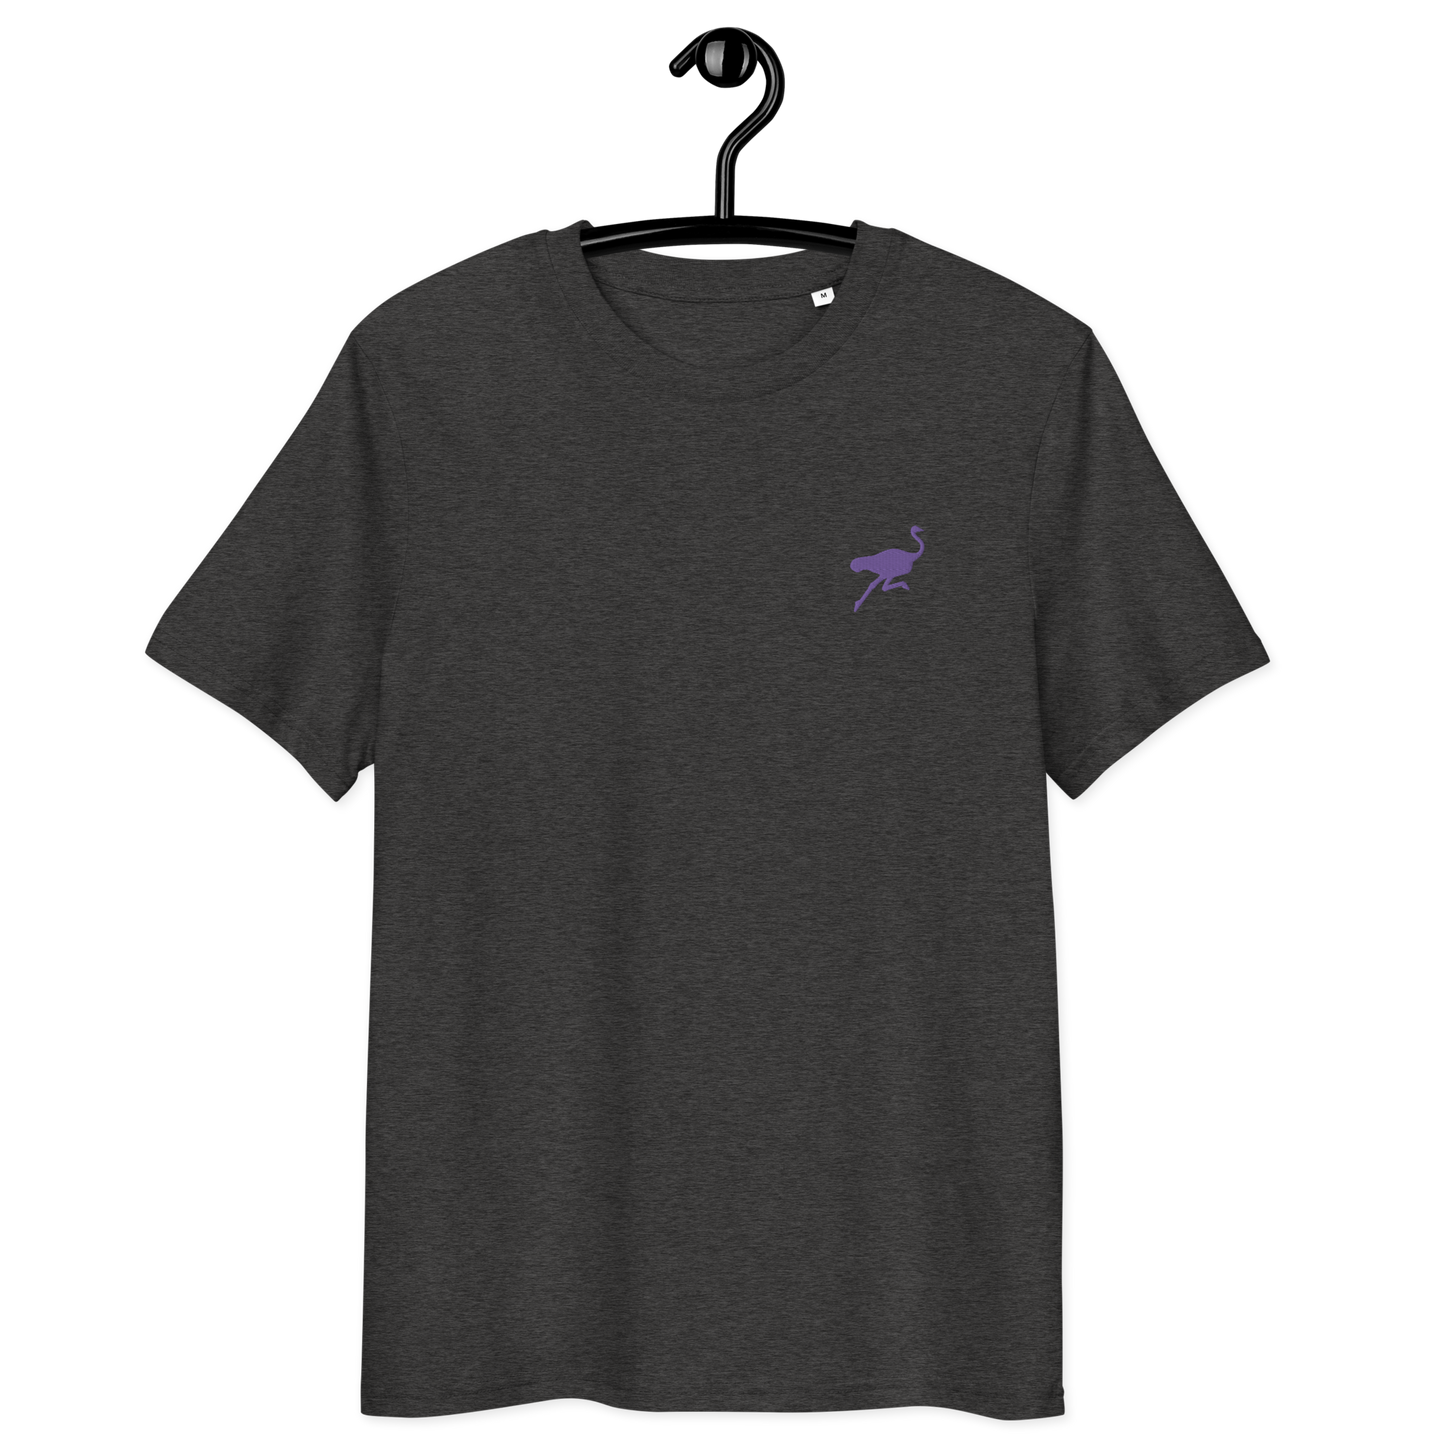 Front view of a dark heather grey embroidered nostr t-shirt.